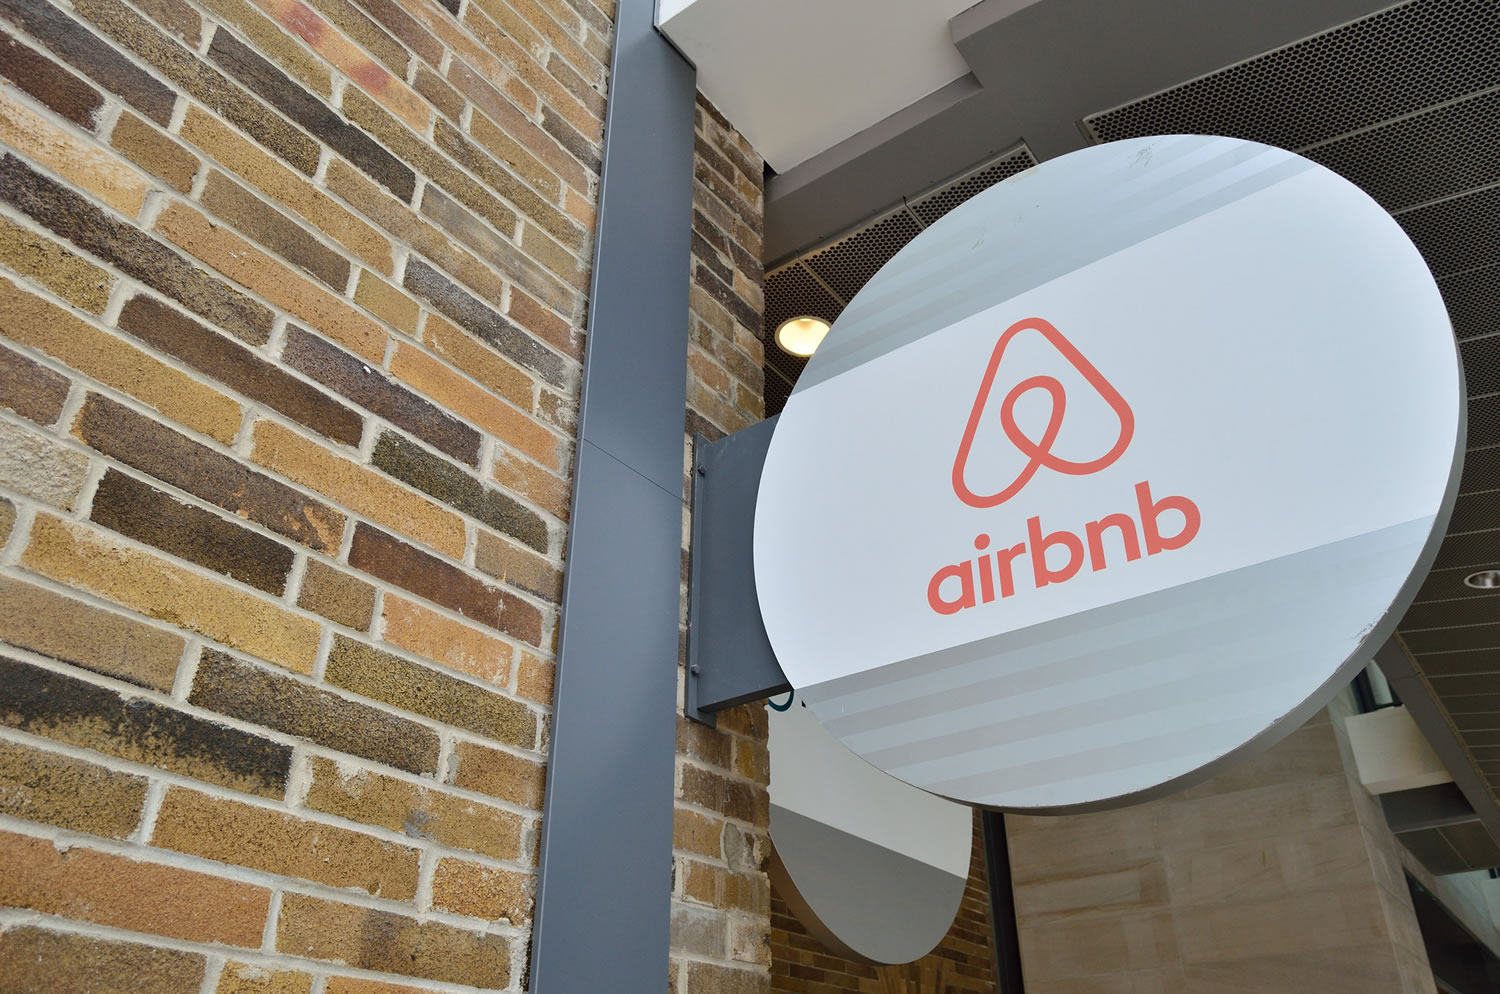 renting property on airbnb